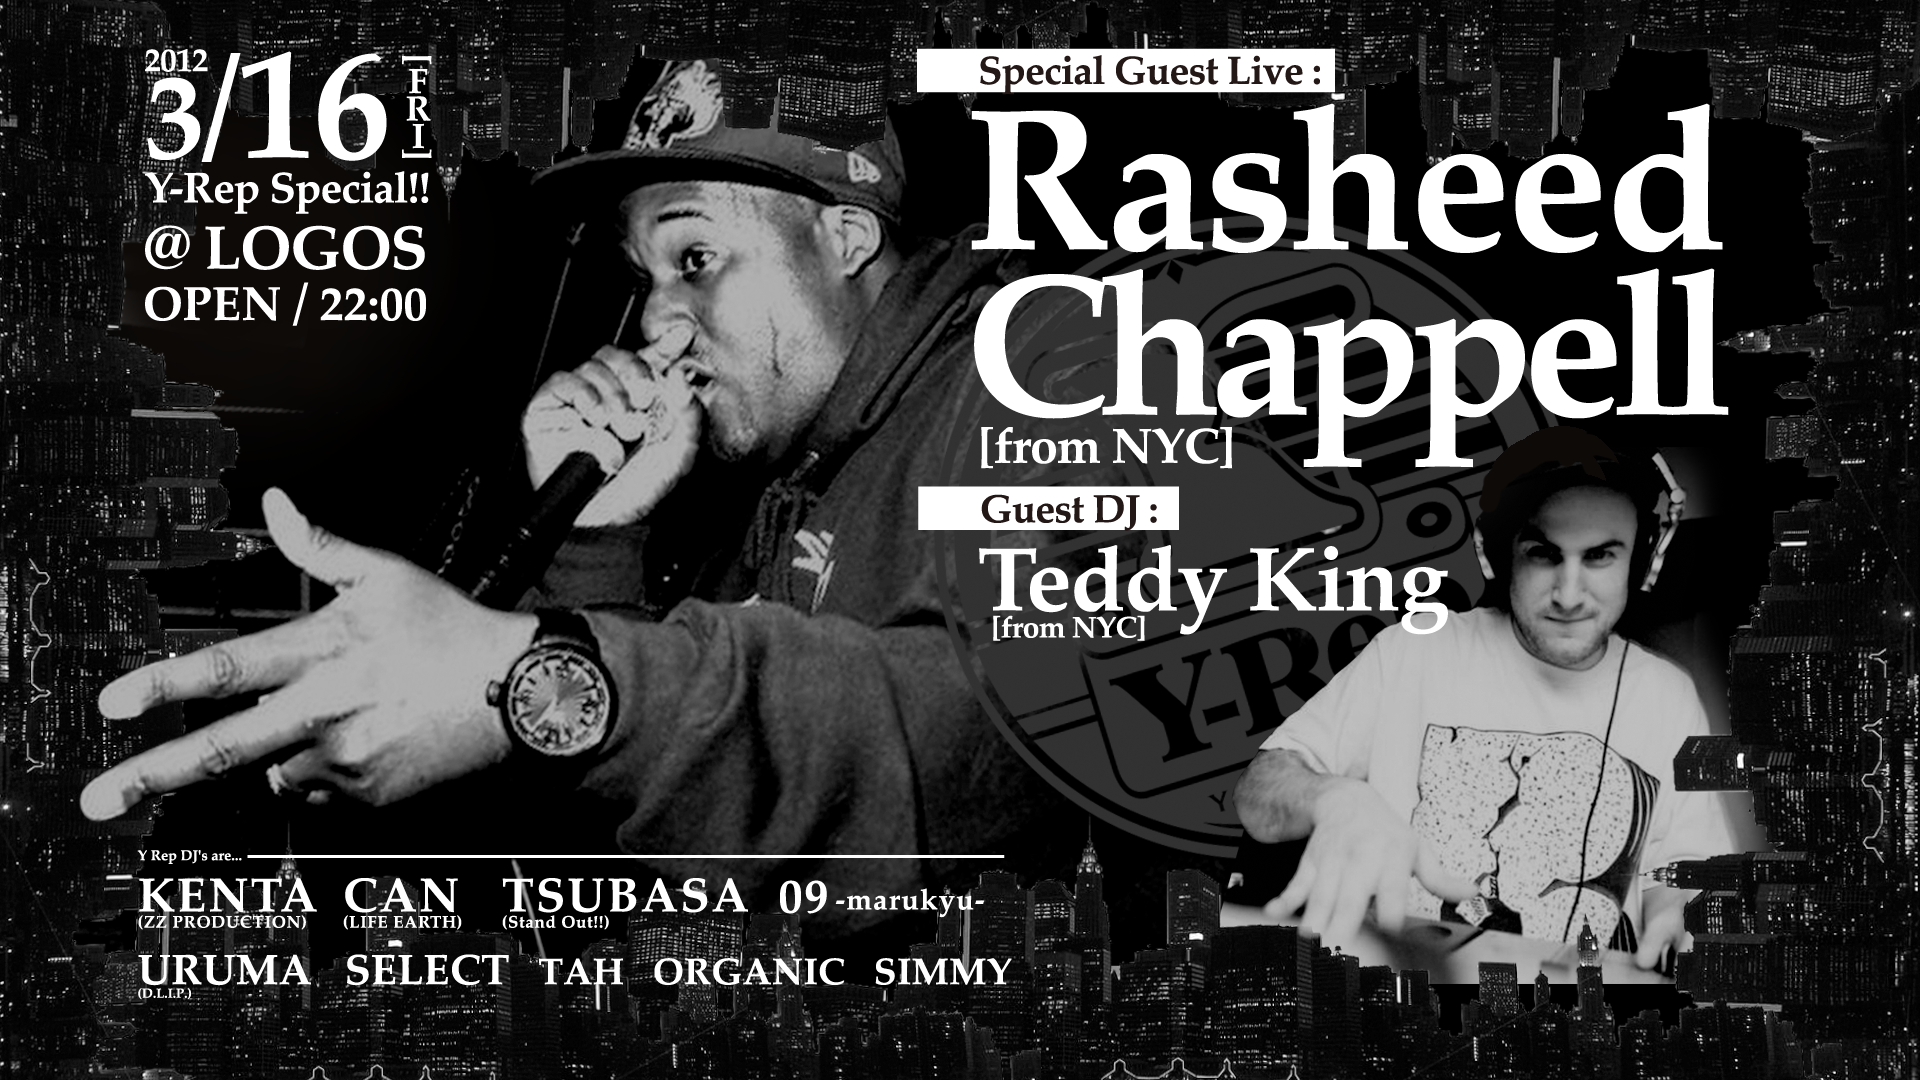 Y-Rep Special!! at LOGOS feat. Rasheed Chappell & Teddy King